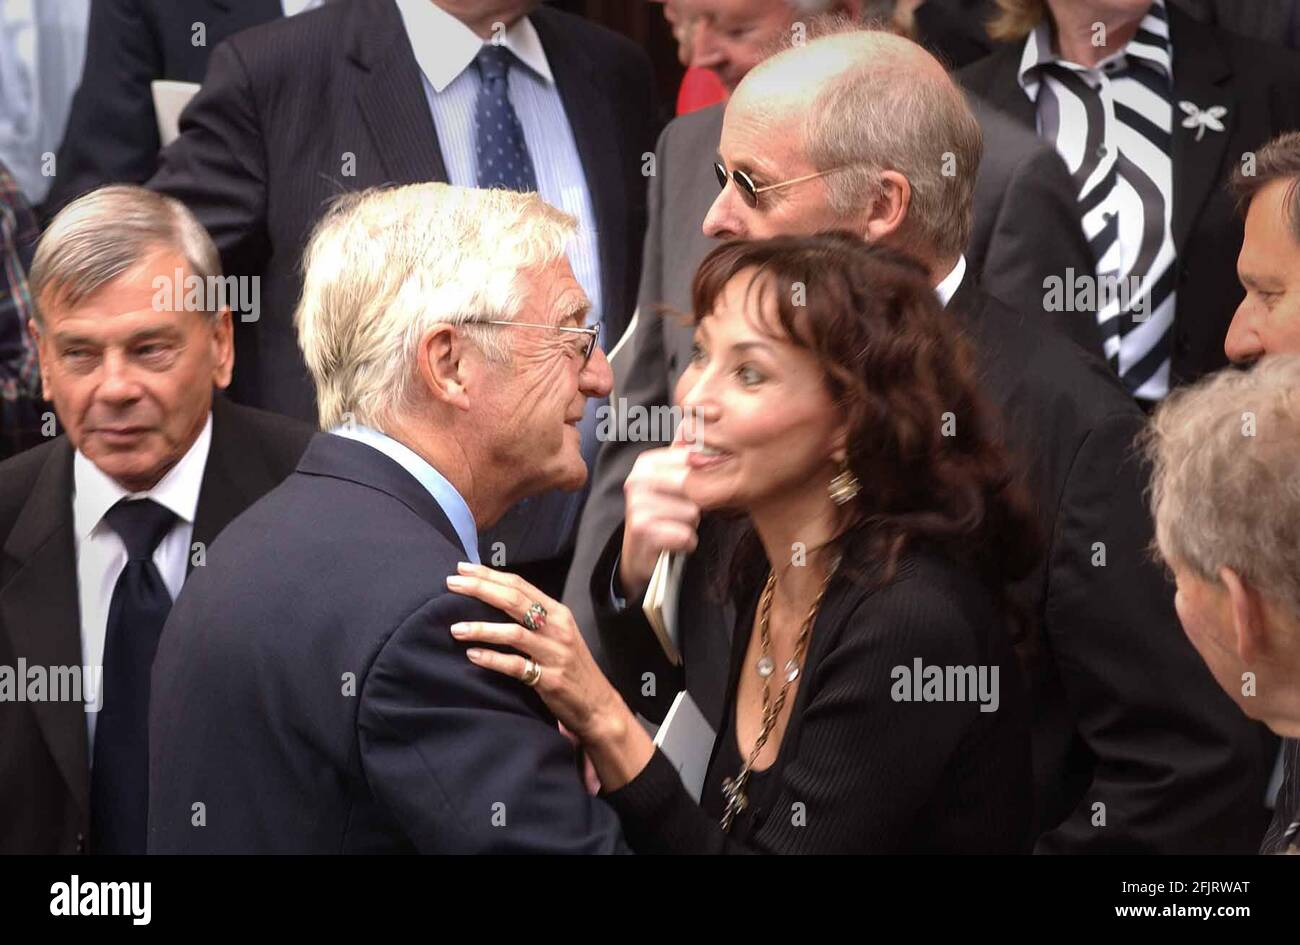 DICKY BIRD,MICHAEL PARKINSON AND MARIE HELVIN AT THE MEMORIAL TO PAUL GETTY AT WESTMINSTER CATHEDRAL.9/9/03 PILSTON Stock Photo